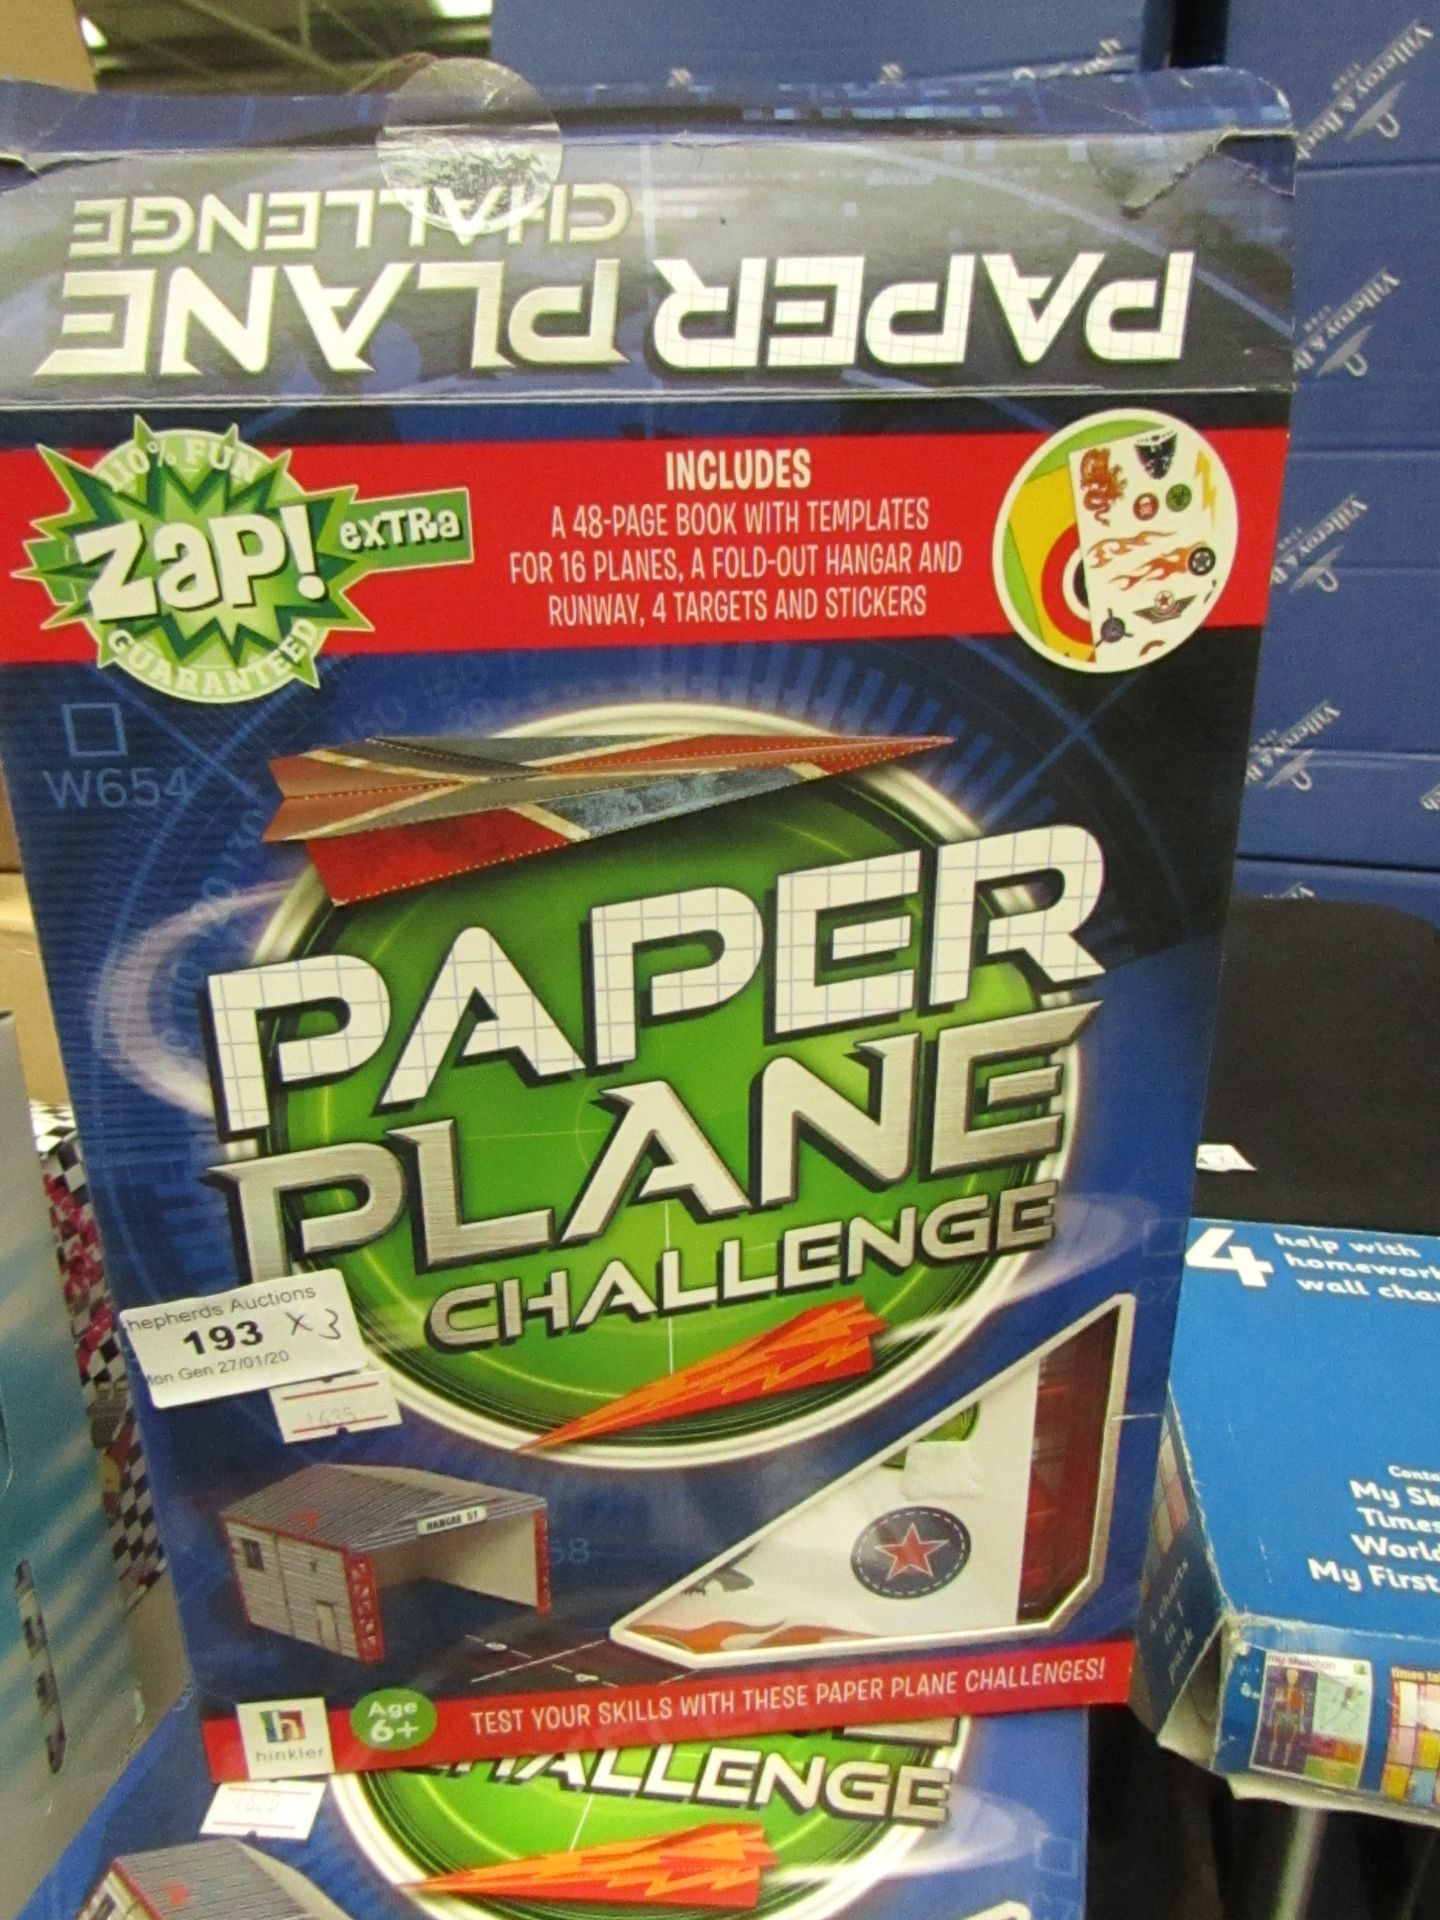 3 x Paper Plane Challenge. Incl Books, Planes, Stickers & targets